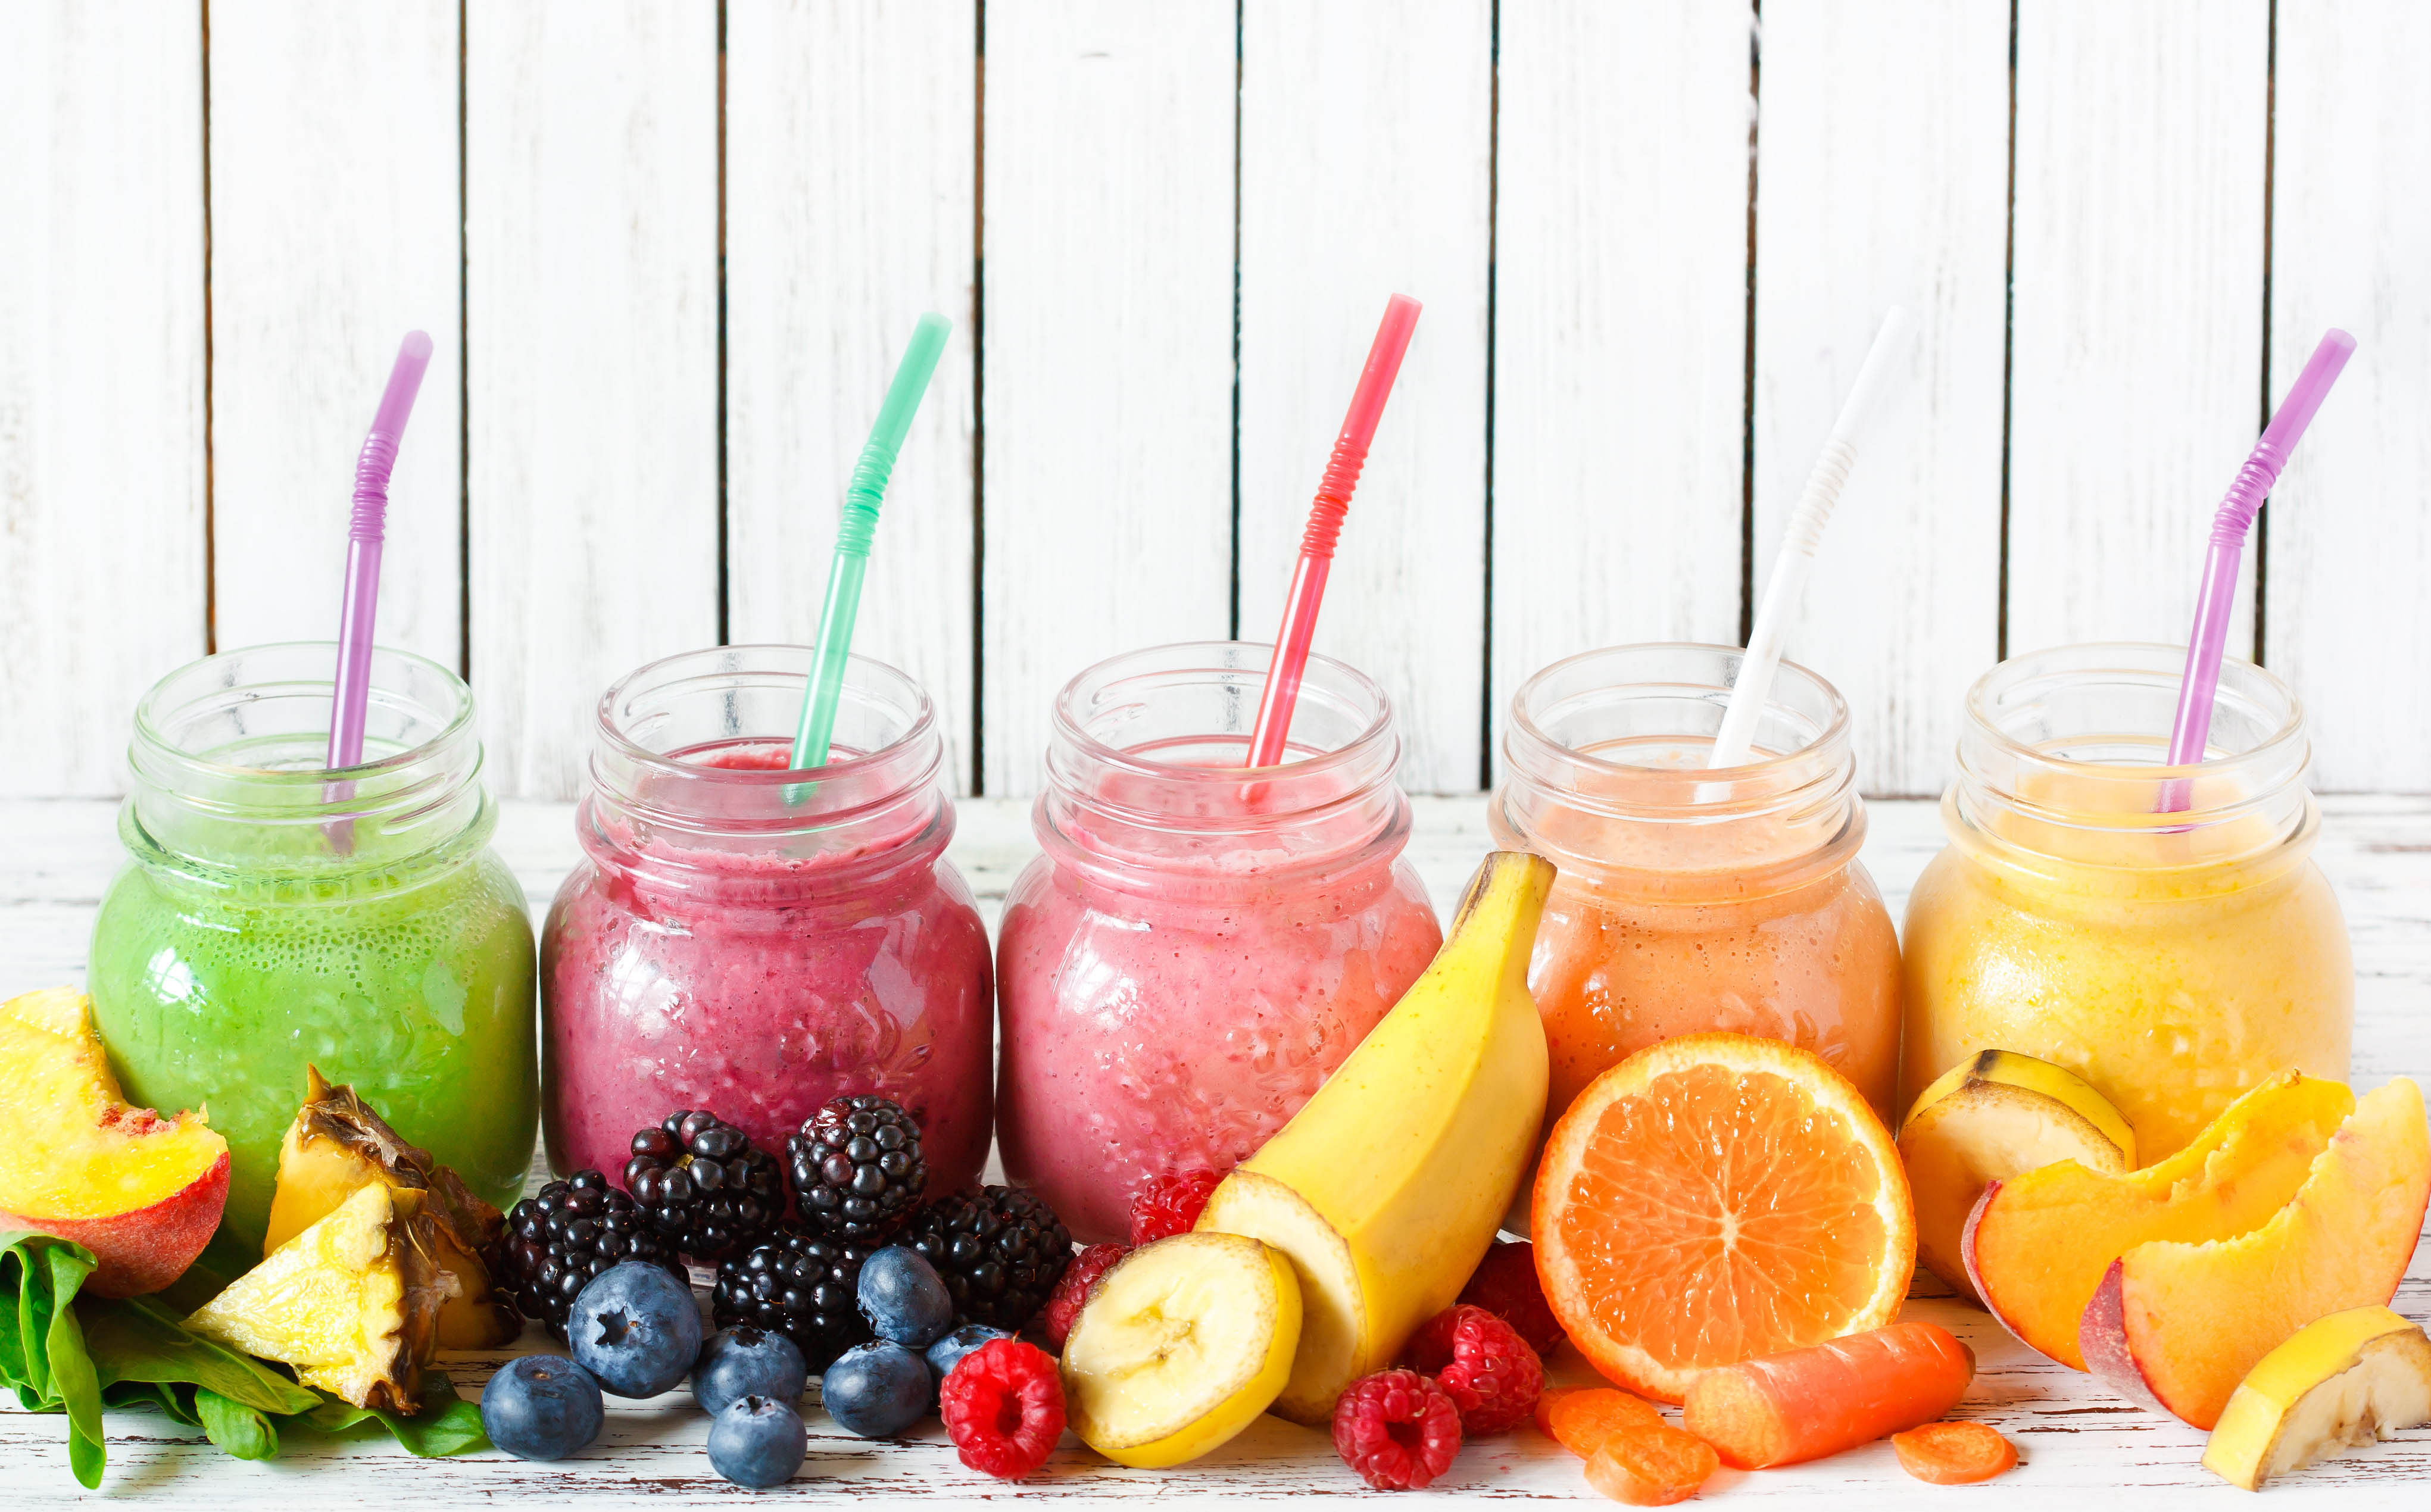 11 delicious and healthy fruit juice combinations to try